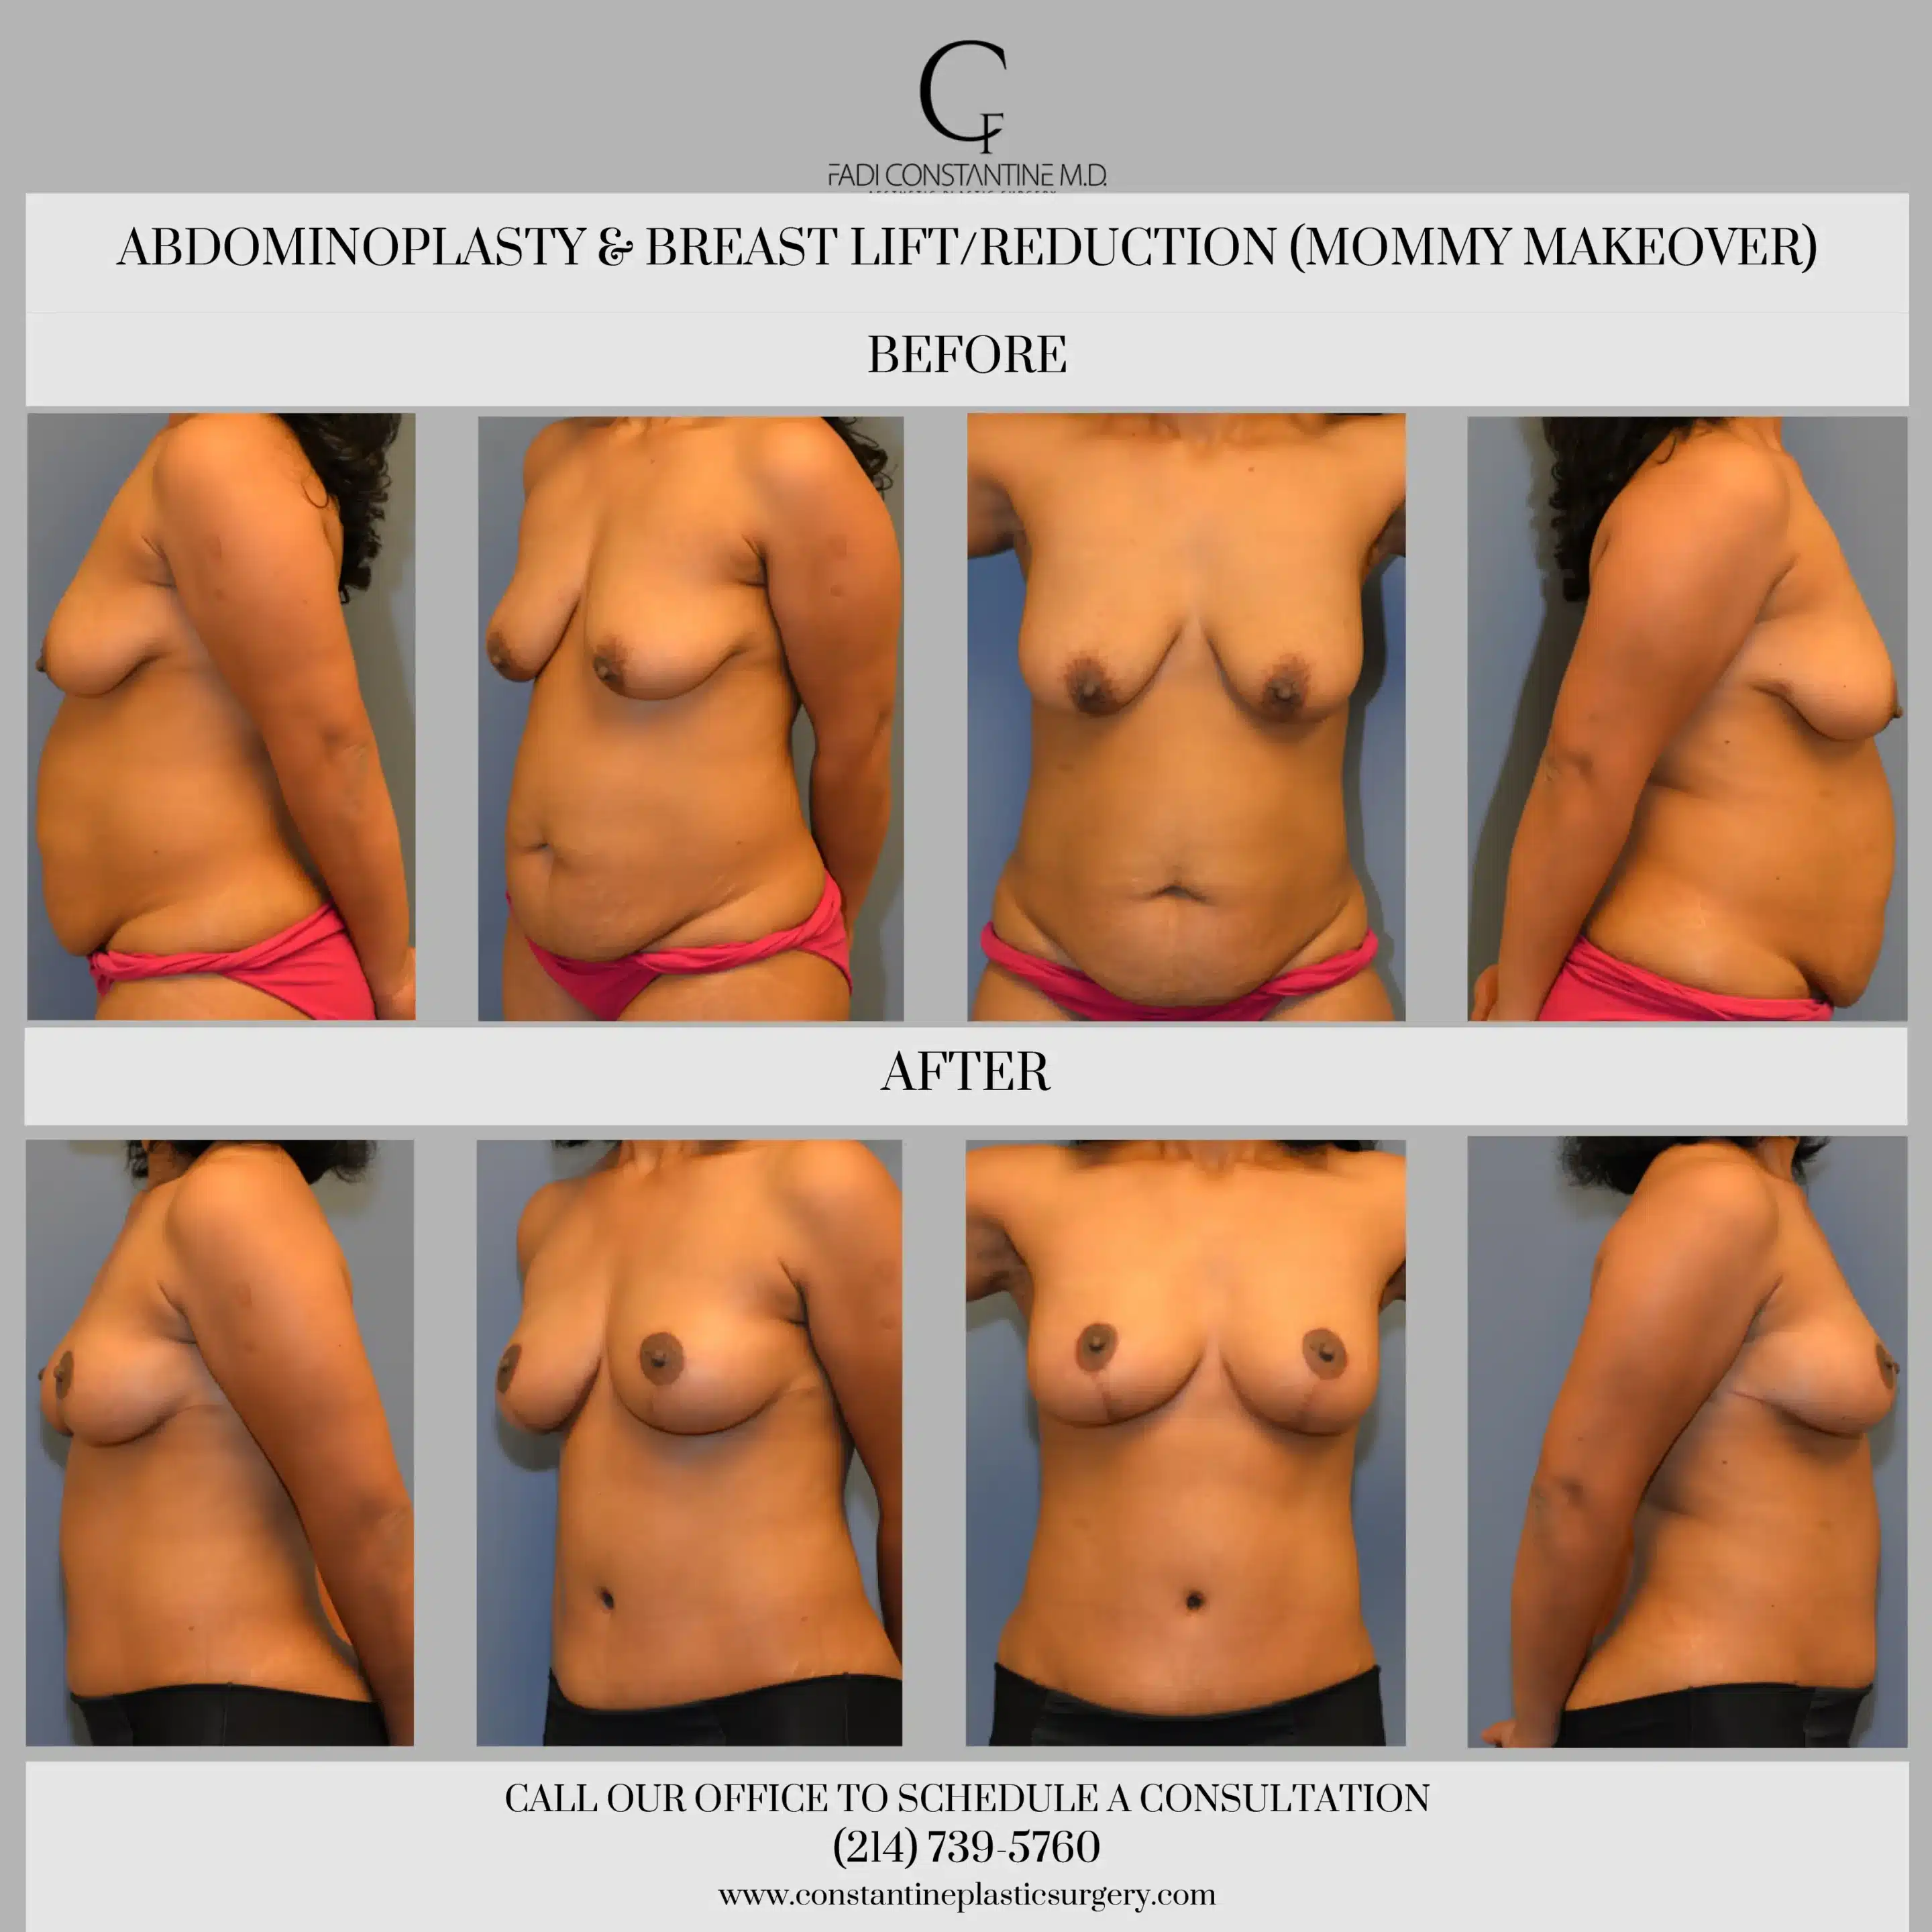 Is a Breast Lift is the Solution to Pregnancy Breast Changes